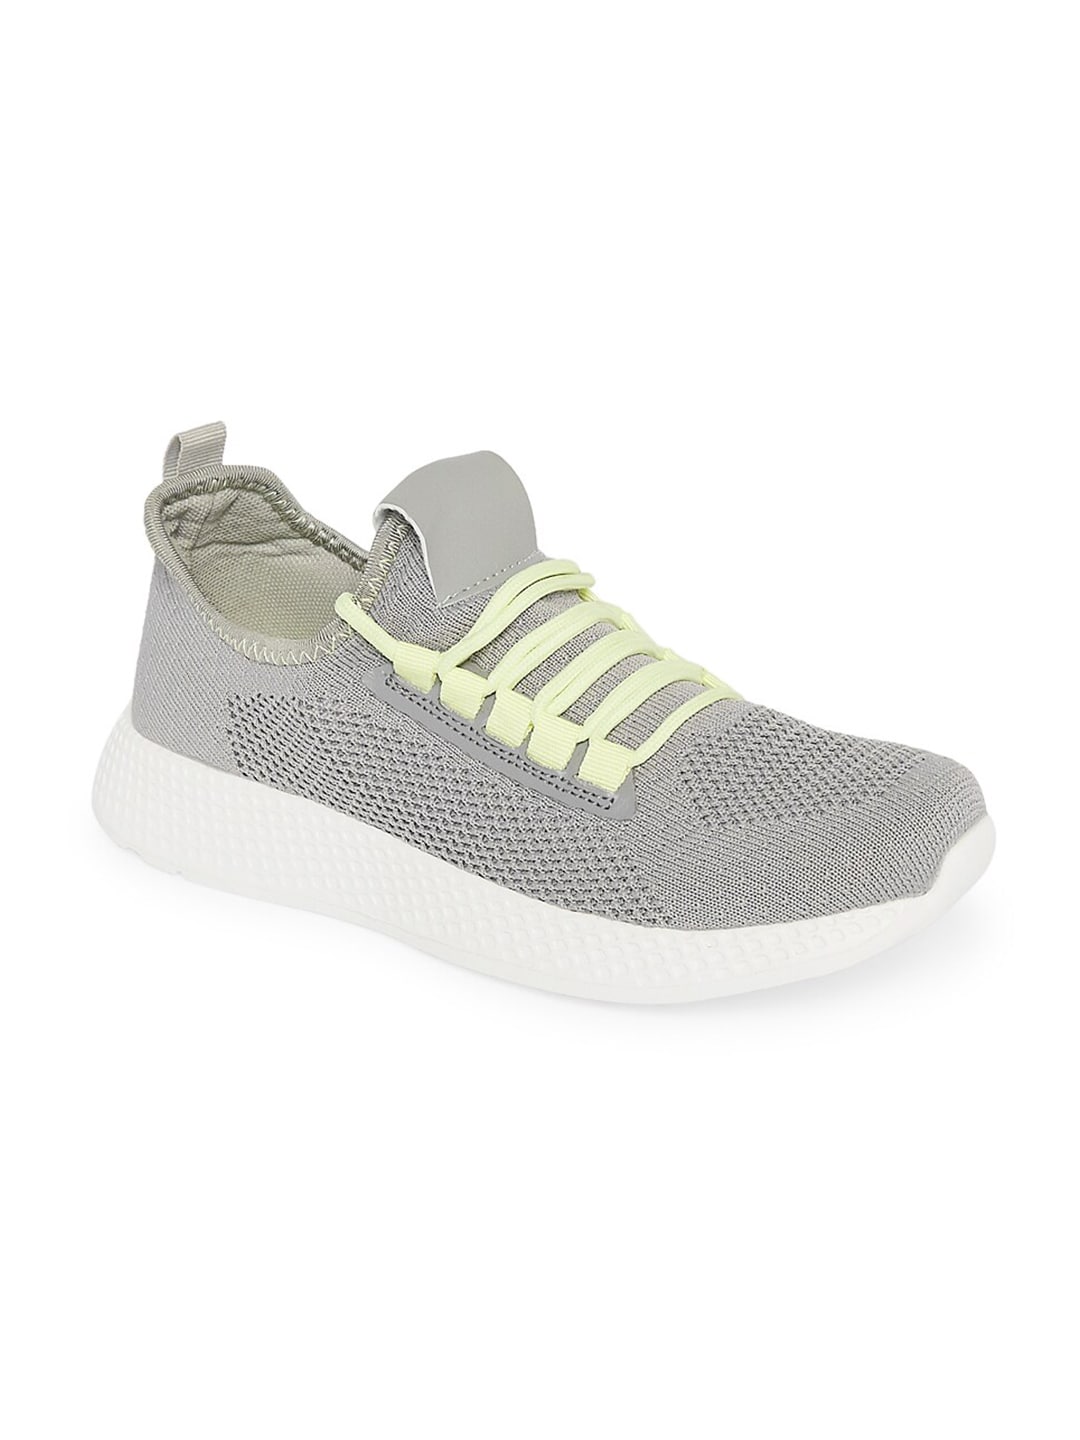 Forever Glam by Pantaloons Women Grey Textile Running Non-Marking Shoes Price in India